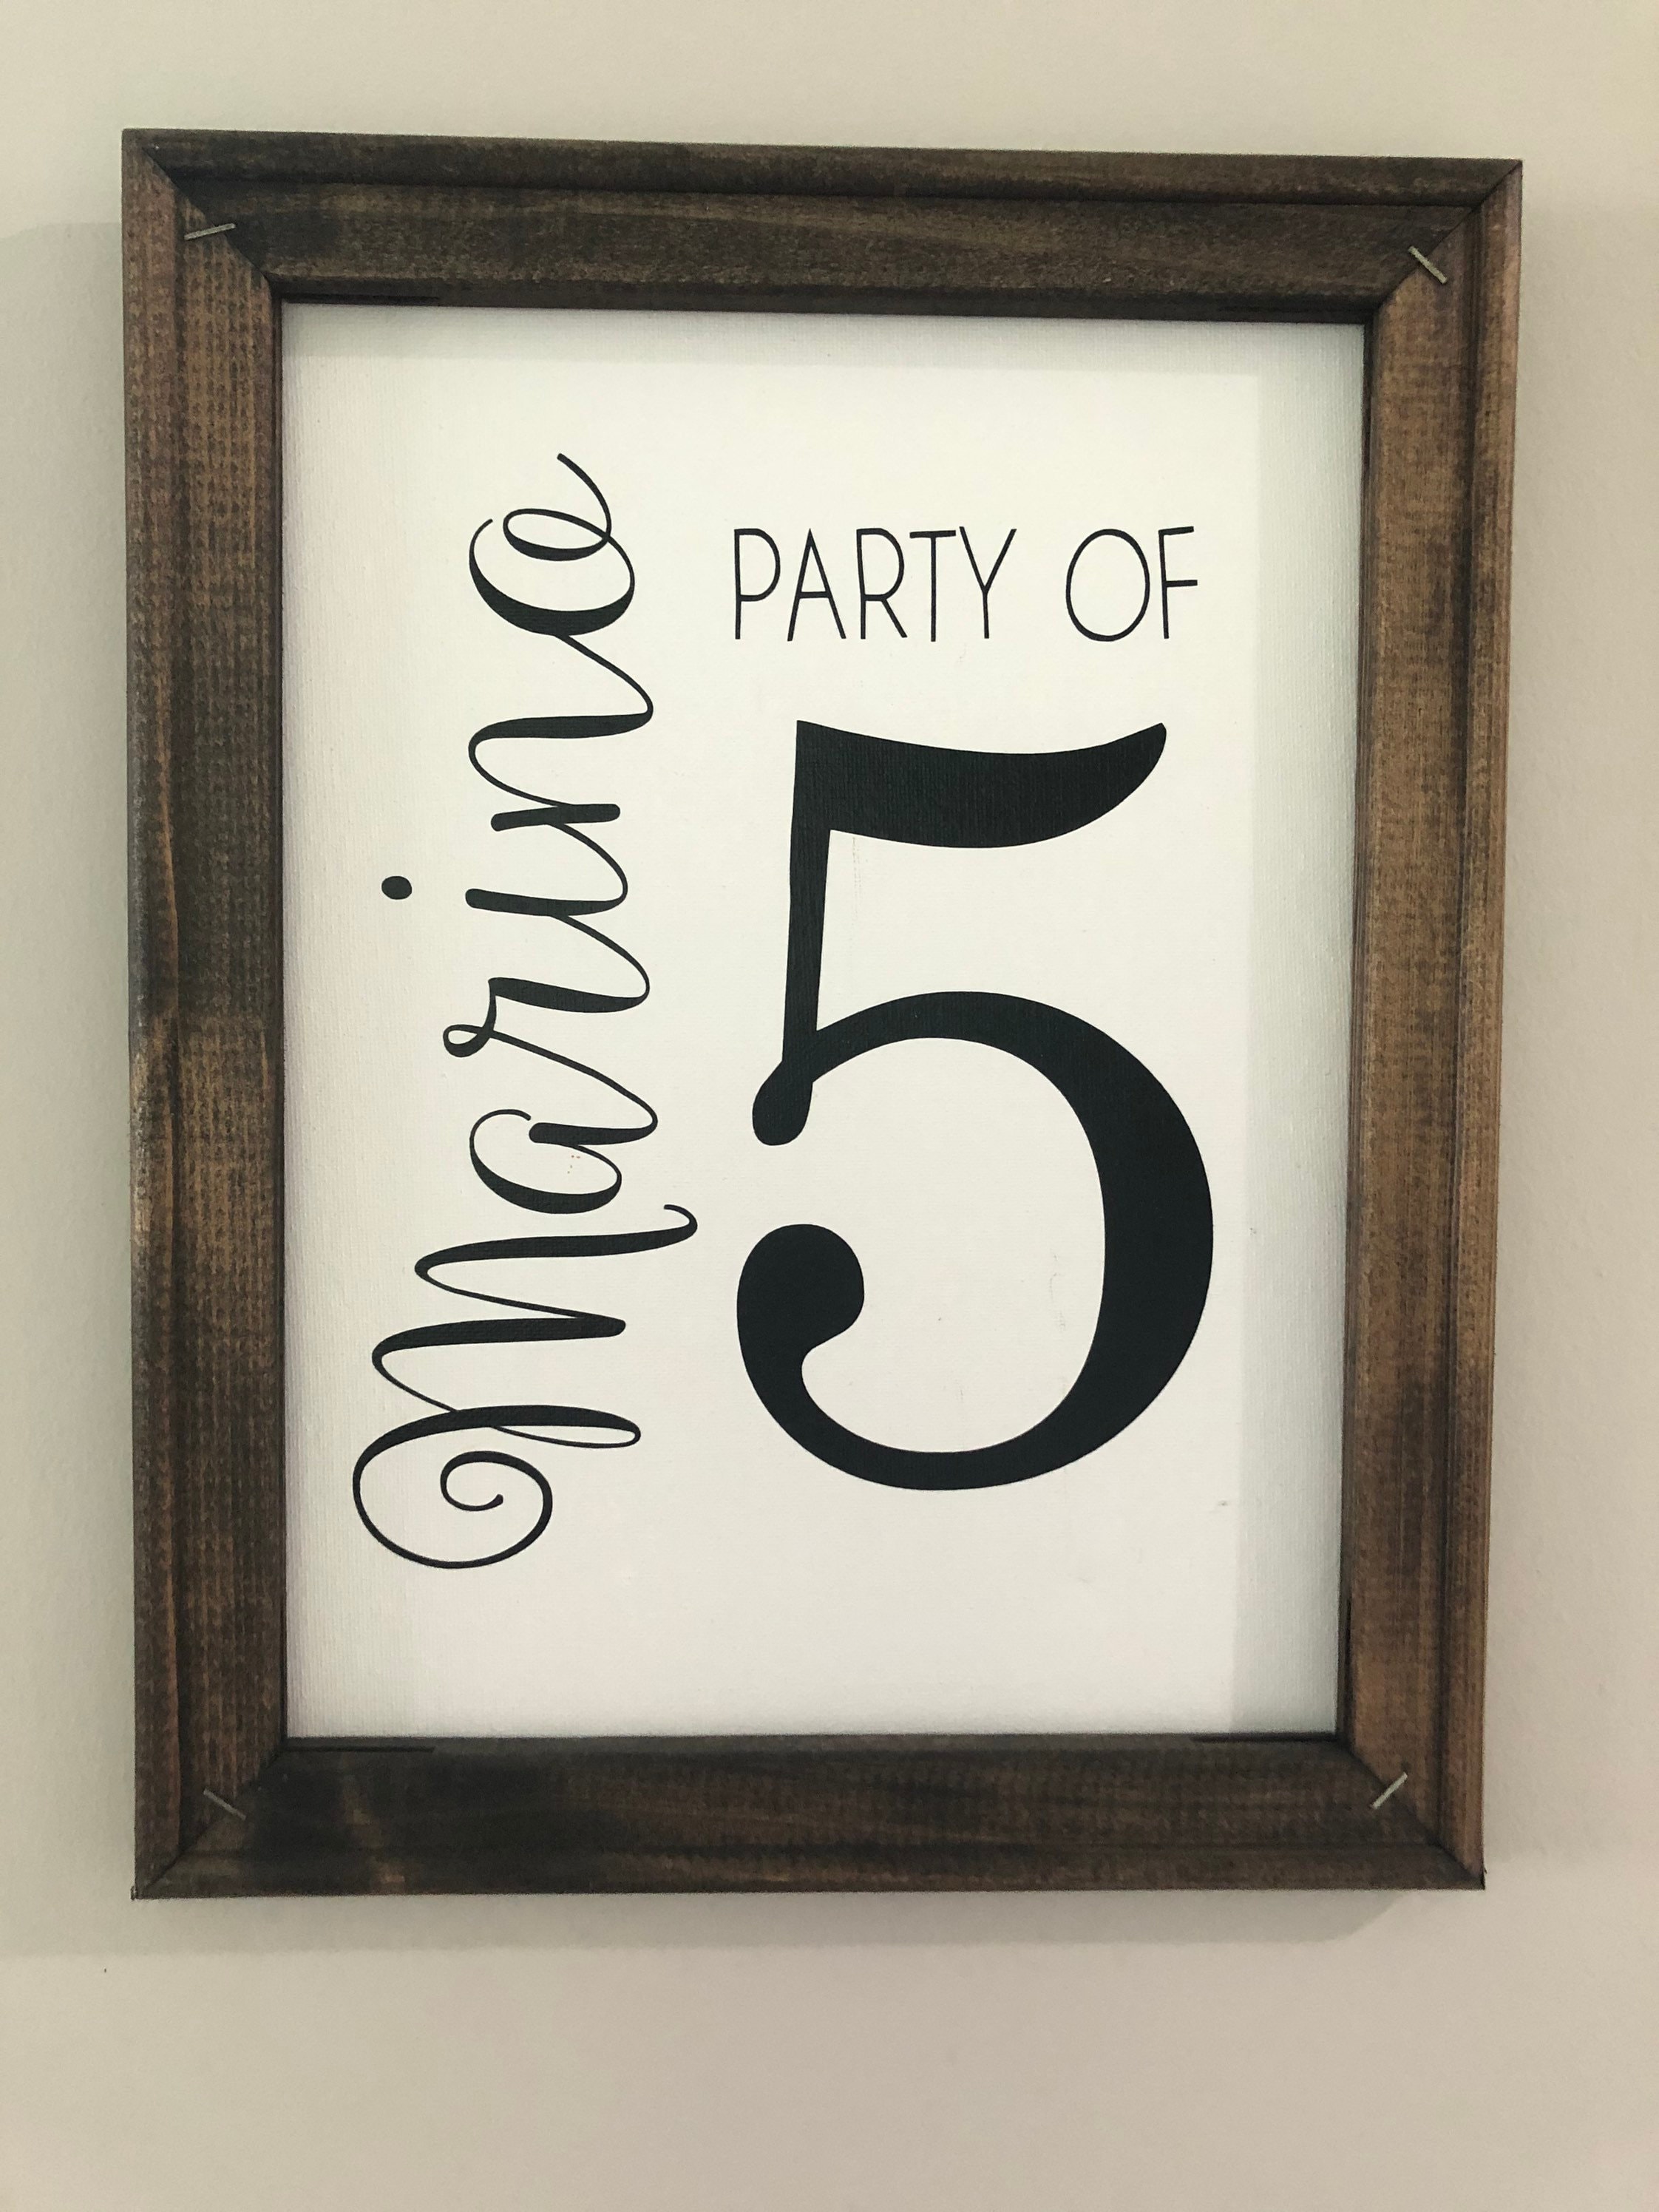 Party of Sign Reverse Canvas Wall Gallery Item Baby 